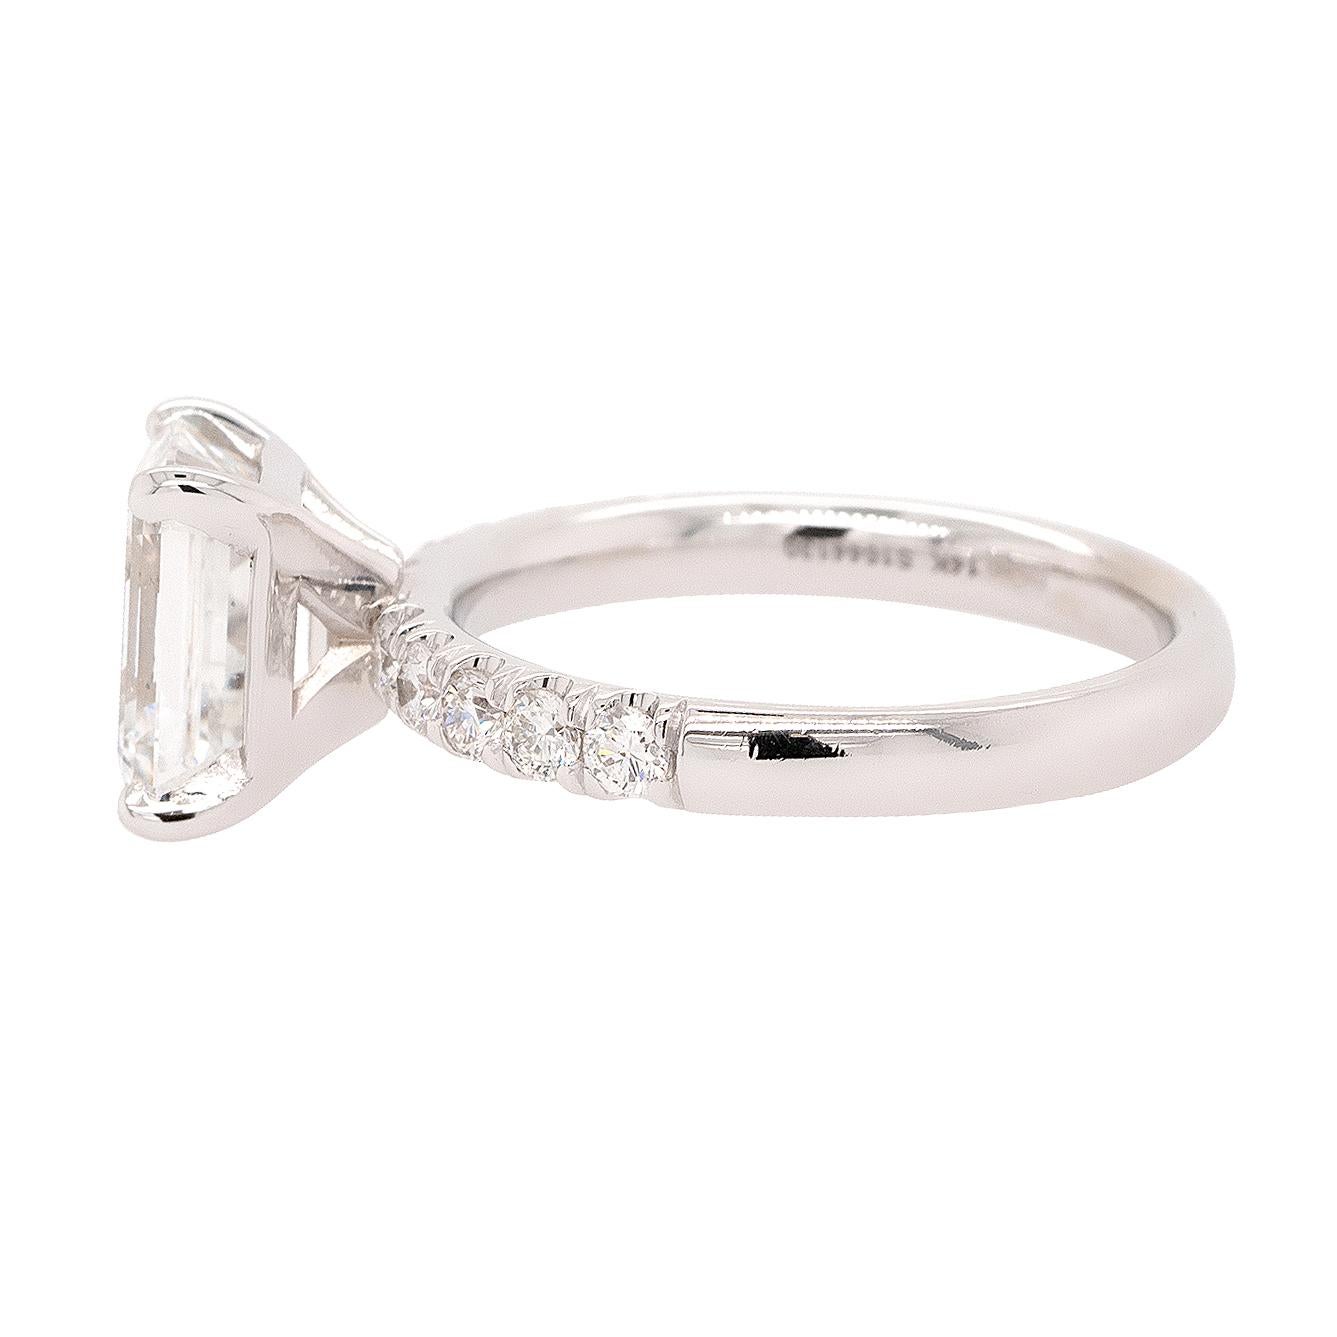 3.03 Carat Emerald Cut GIA Natural Diamond Engagement Ring For Sale 1